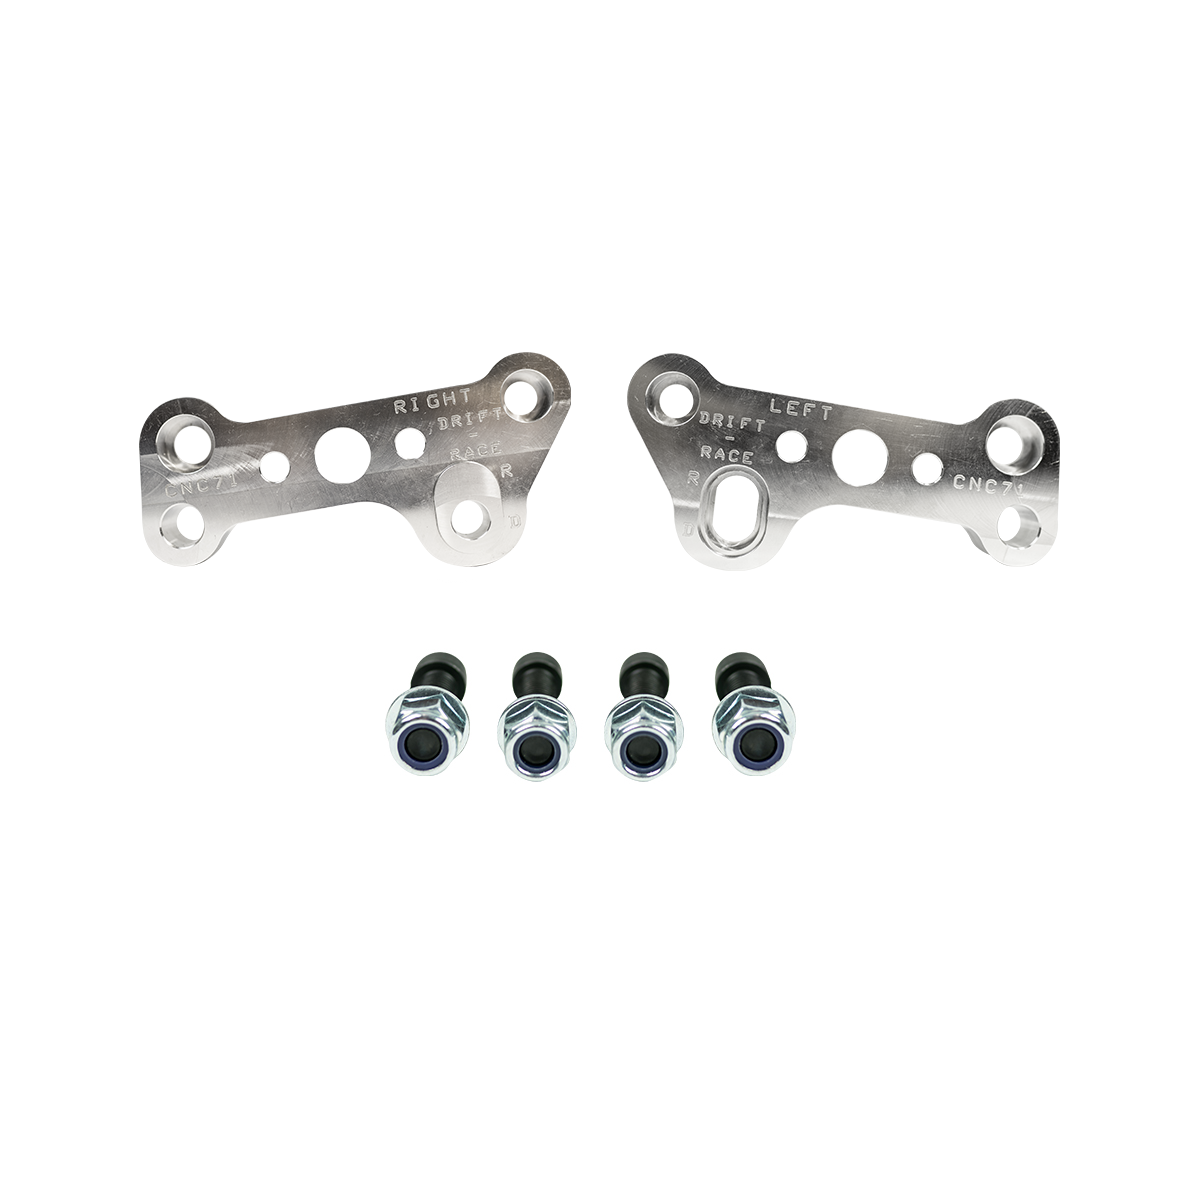 CNC71 - DRIFT ADAPTERS FOR BMW E36 ACKERMAN - STOCK ARM